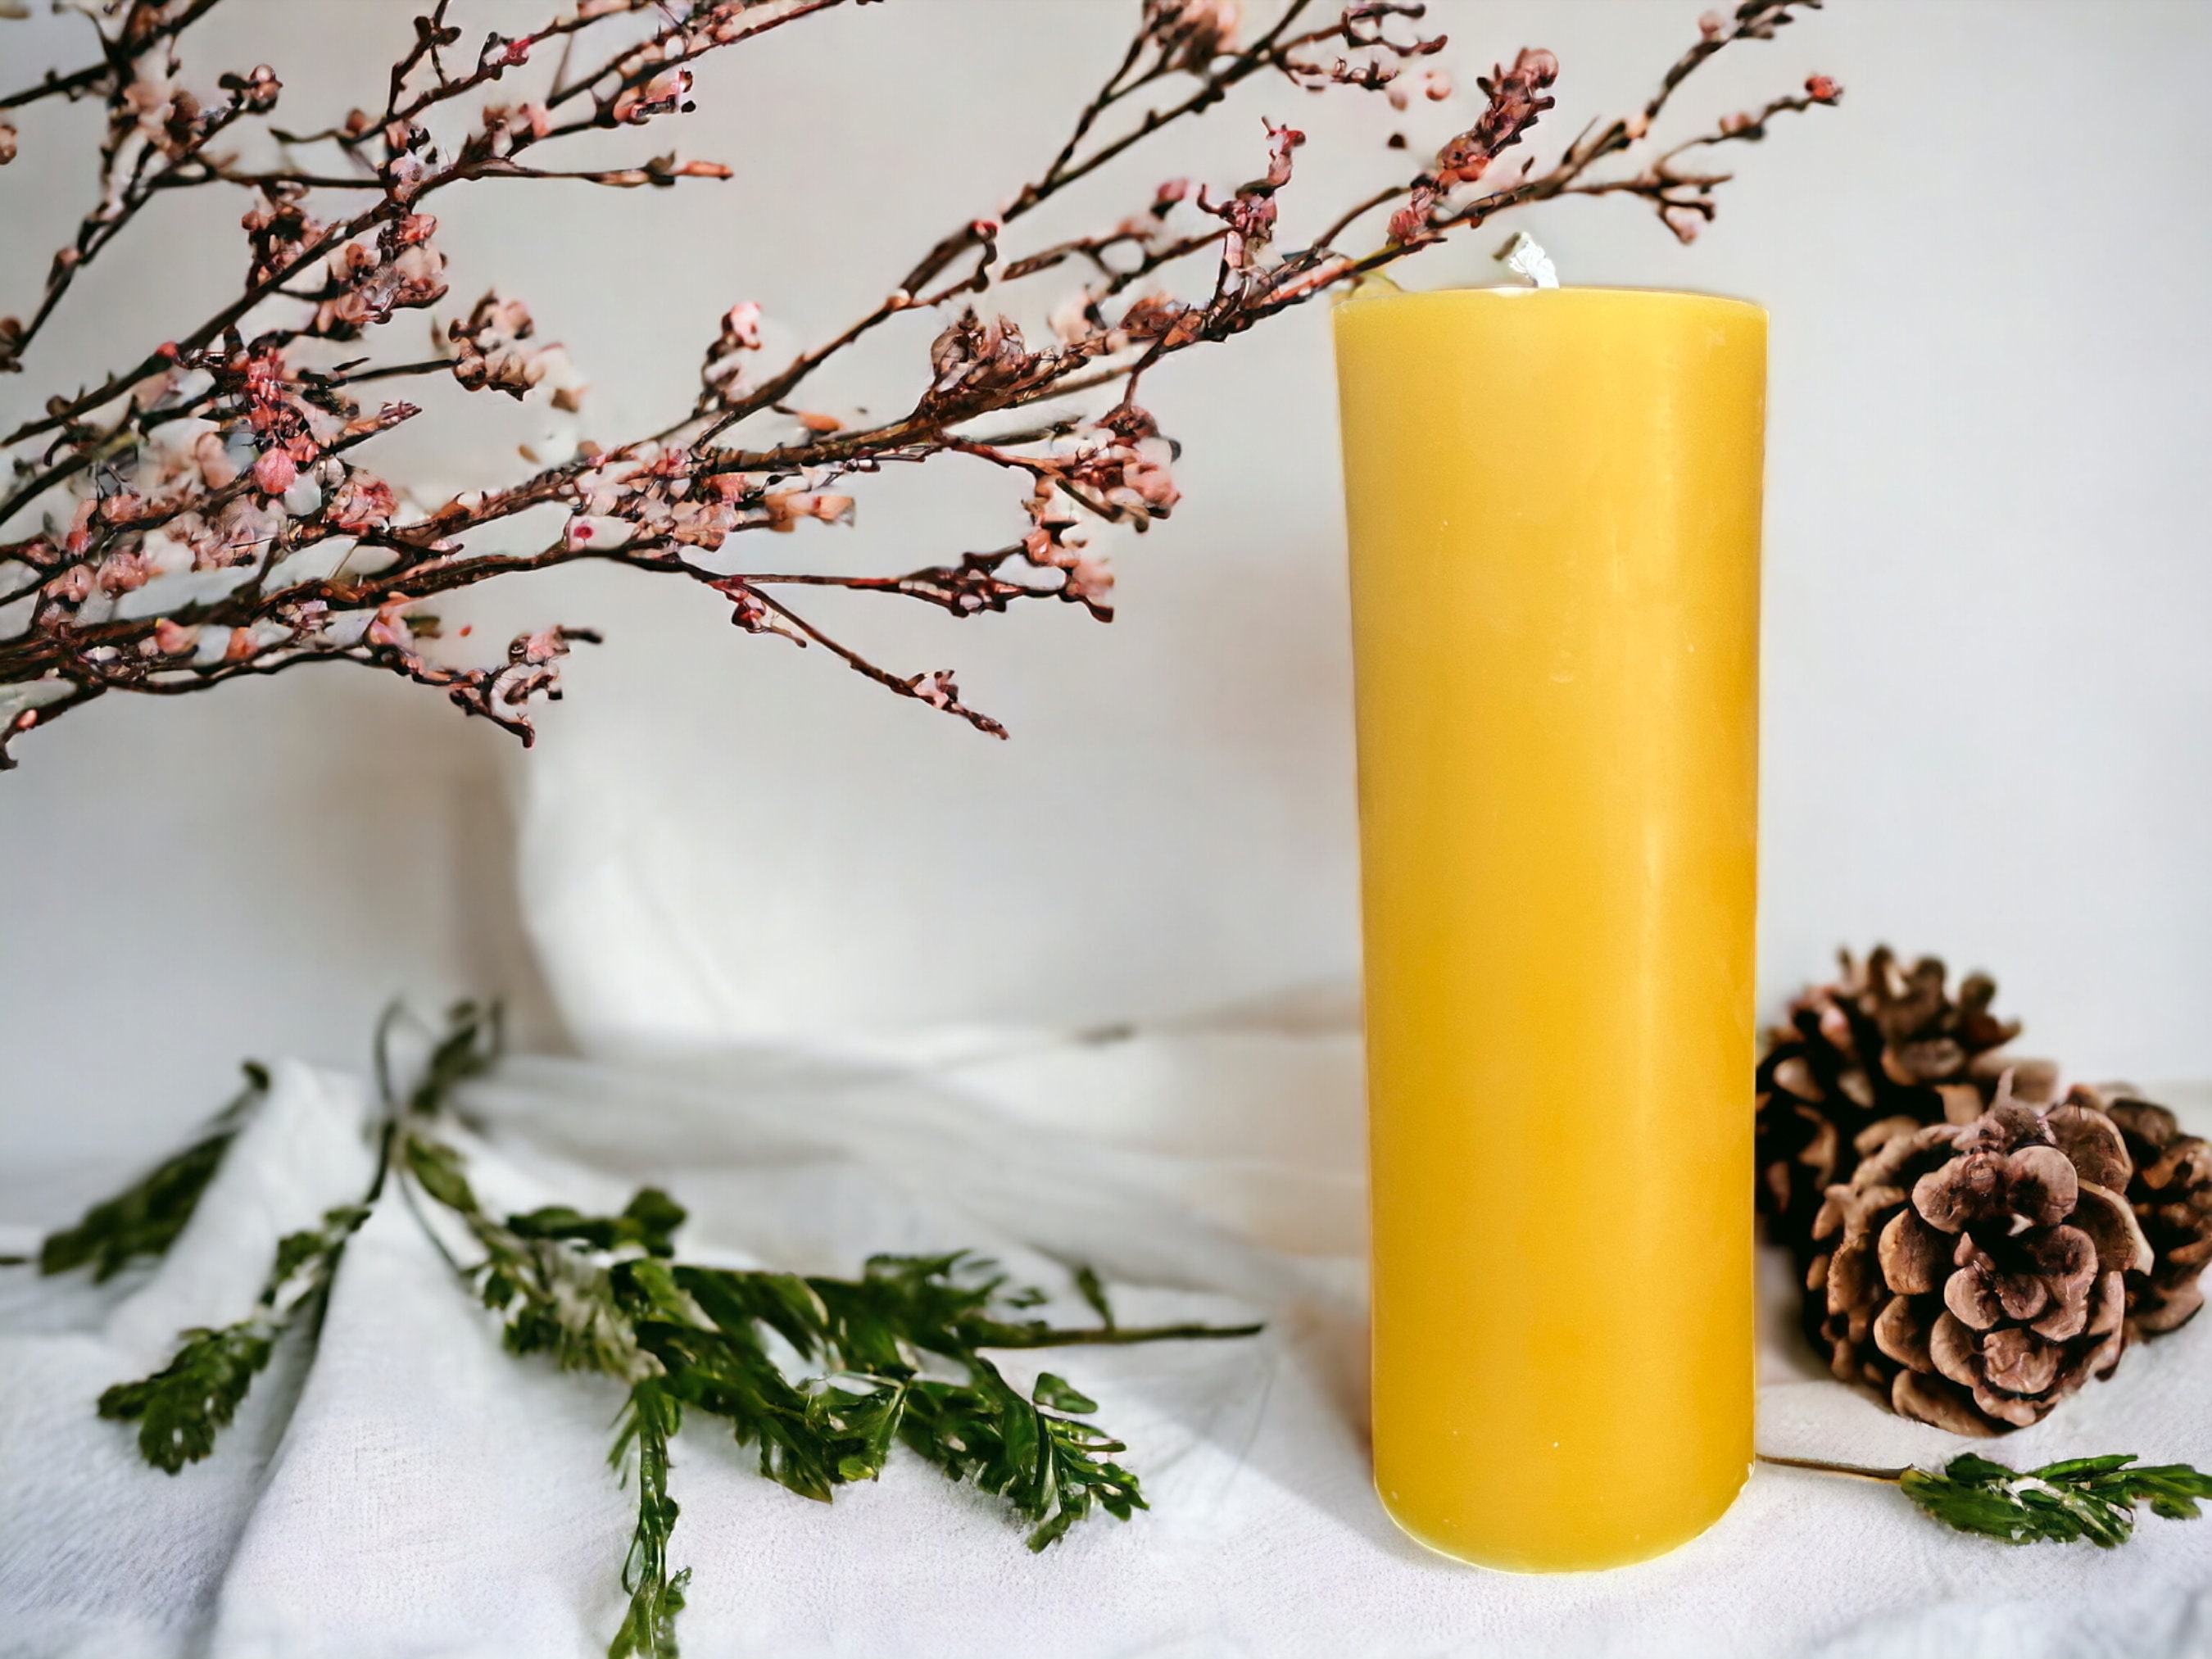 3 Day 100% Beeswax Devotional Candle